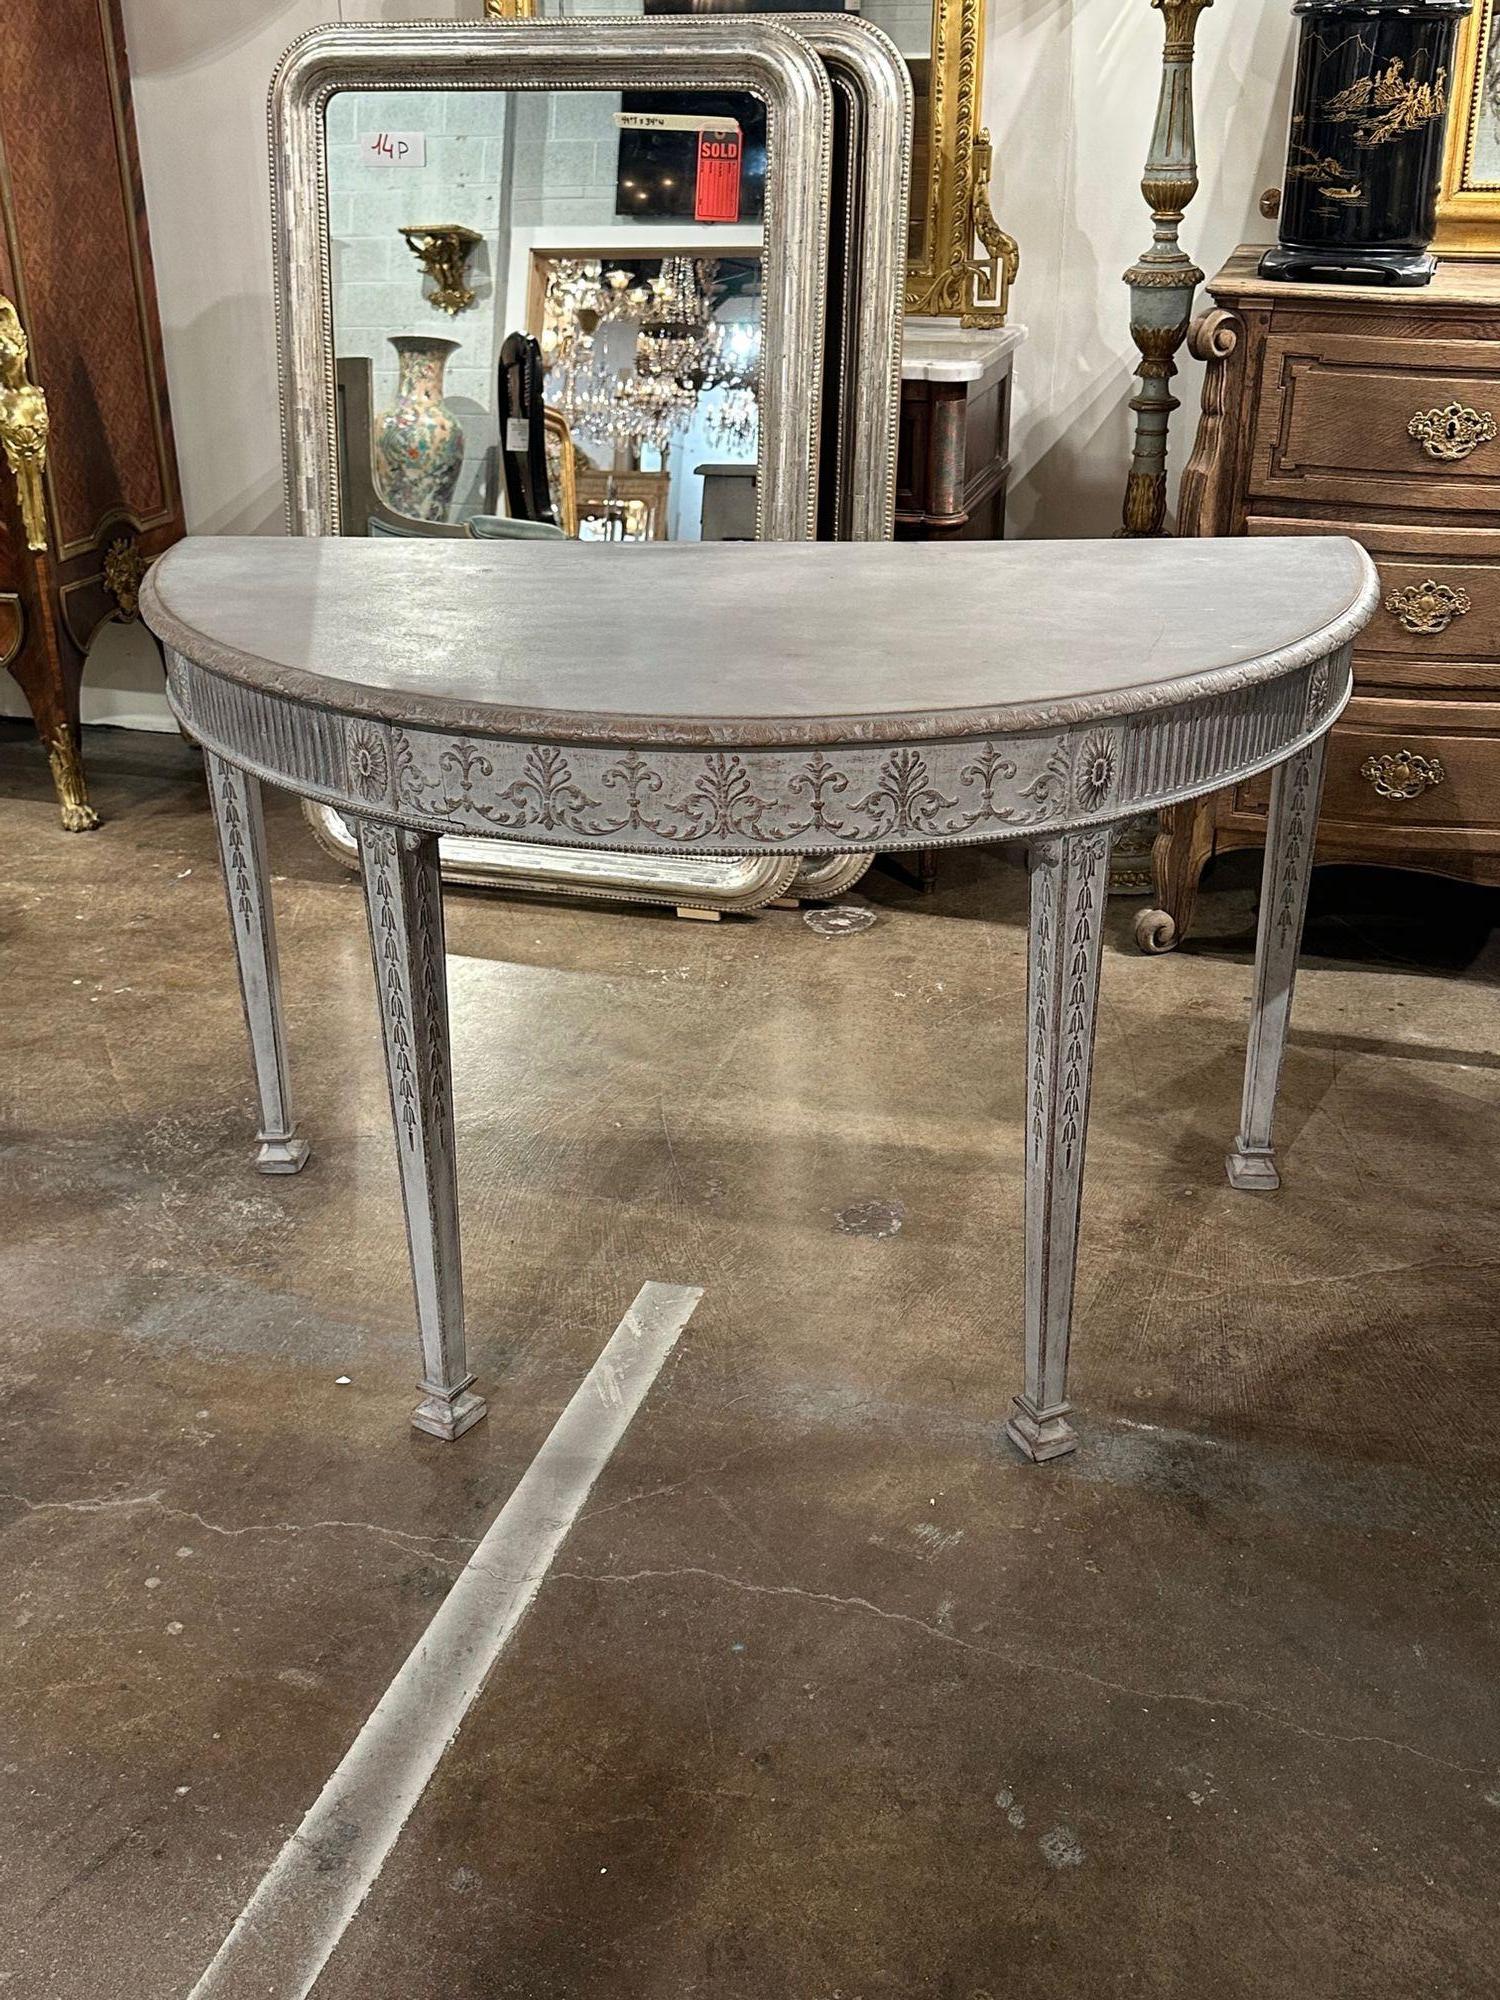 Beautiful 19th century Gustavian neo-classical carved and painted demi-lune console. Circa 1880. Perfect for today's transitional designs!